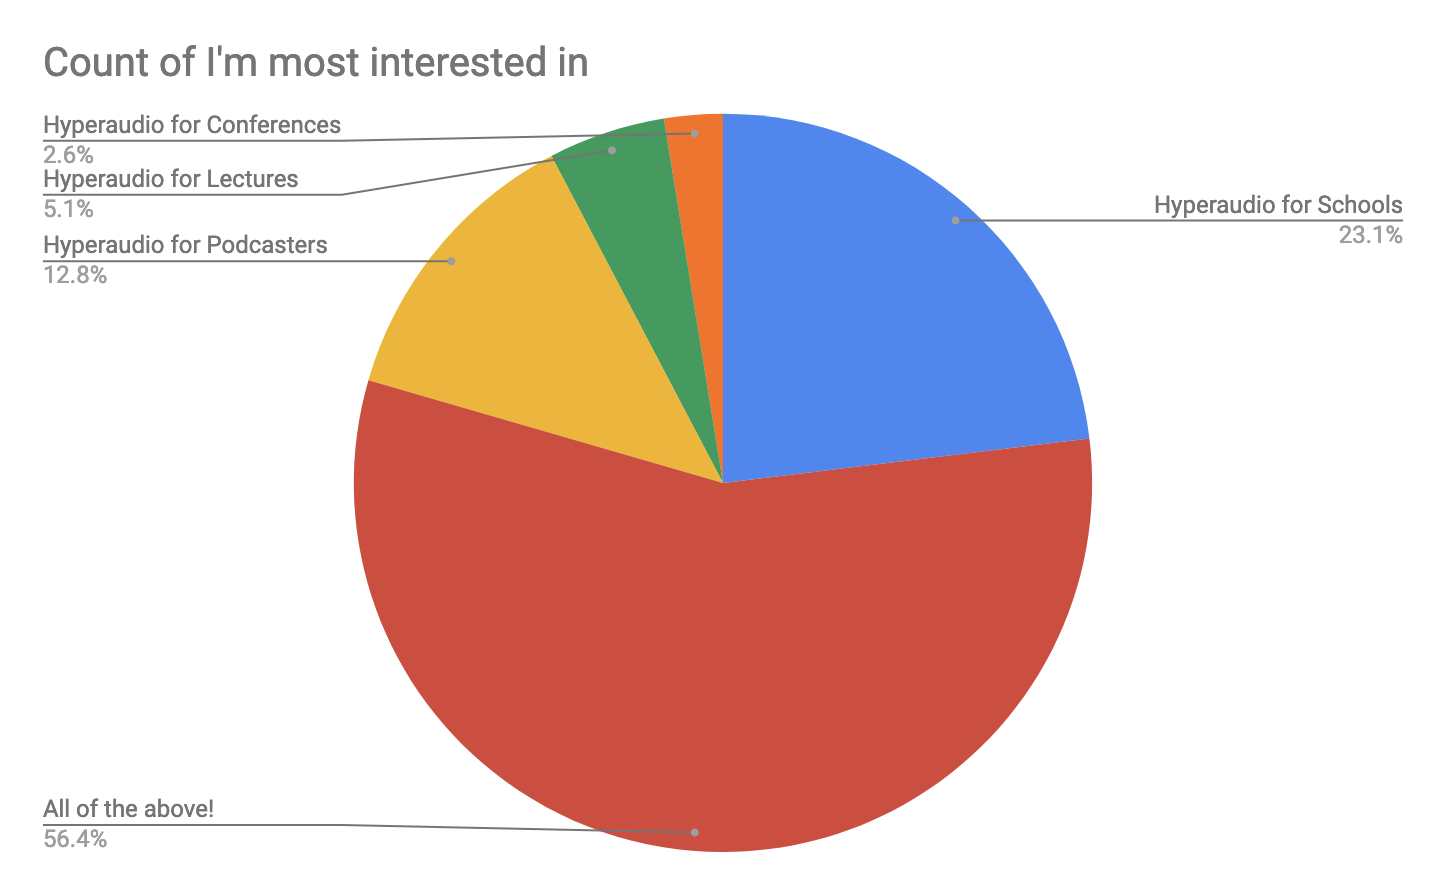 pie chart of interest in Hyperaudio usecases - conferences 2.6%, lectures 5.1%, podcasters 12.8%, schools 23.1%, all of the above 56.4%